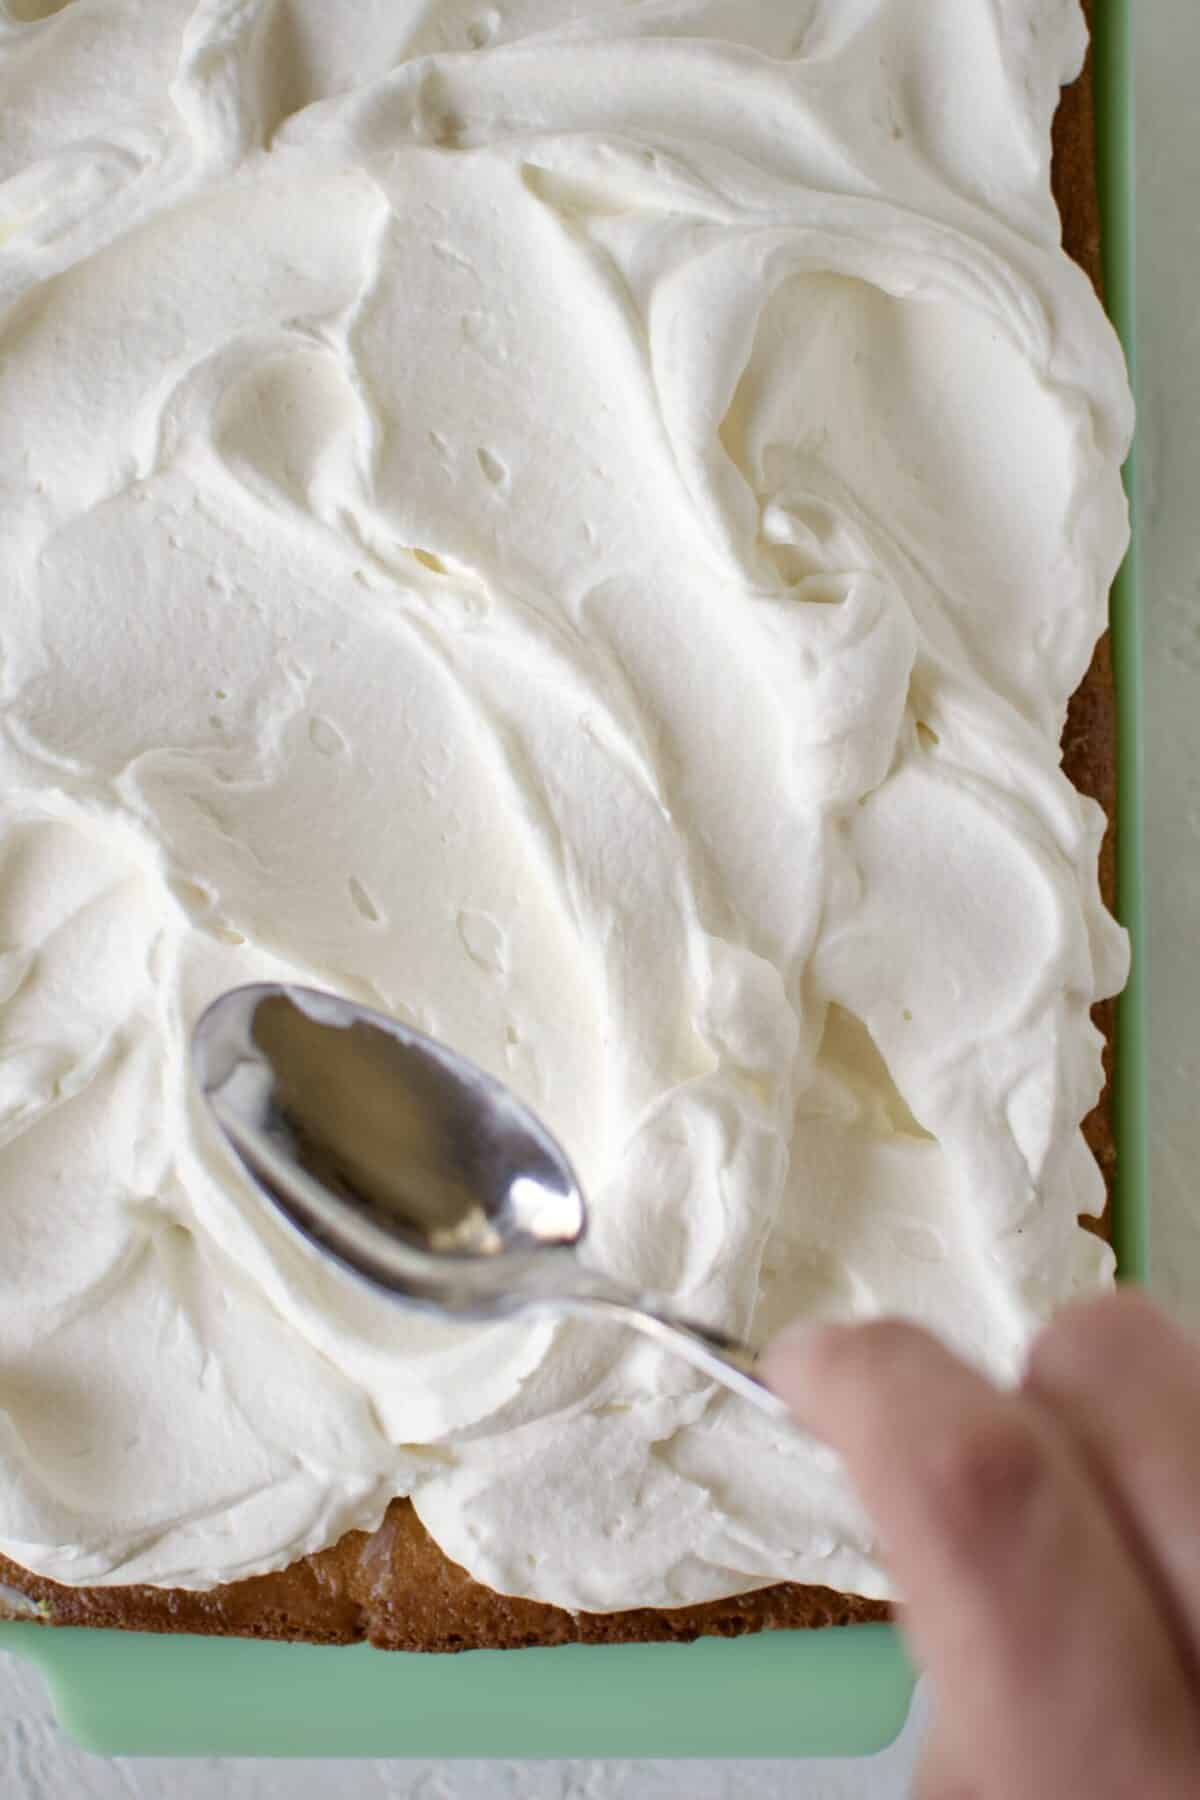 Spreading whipped cream over the tres leches cake.